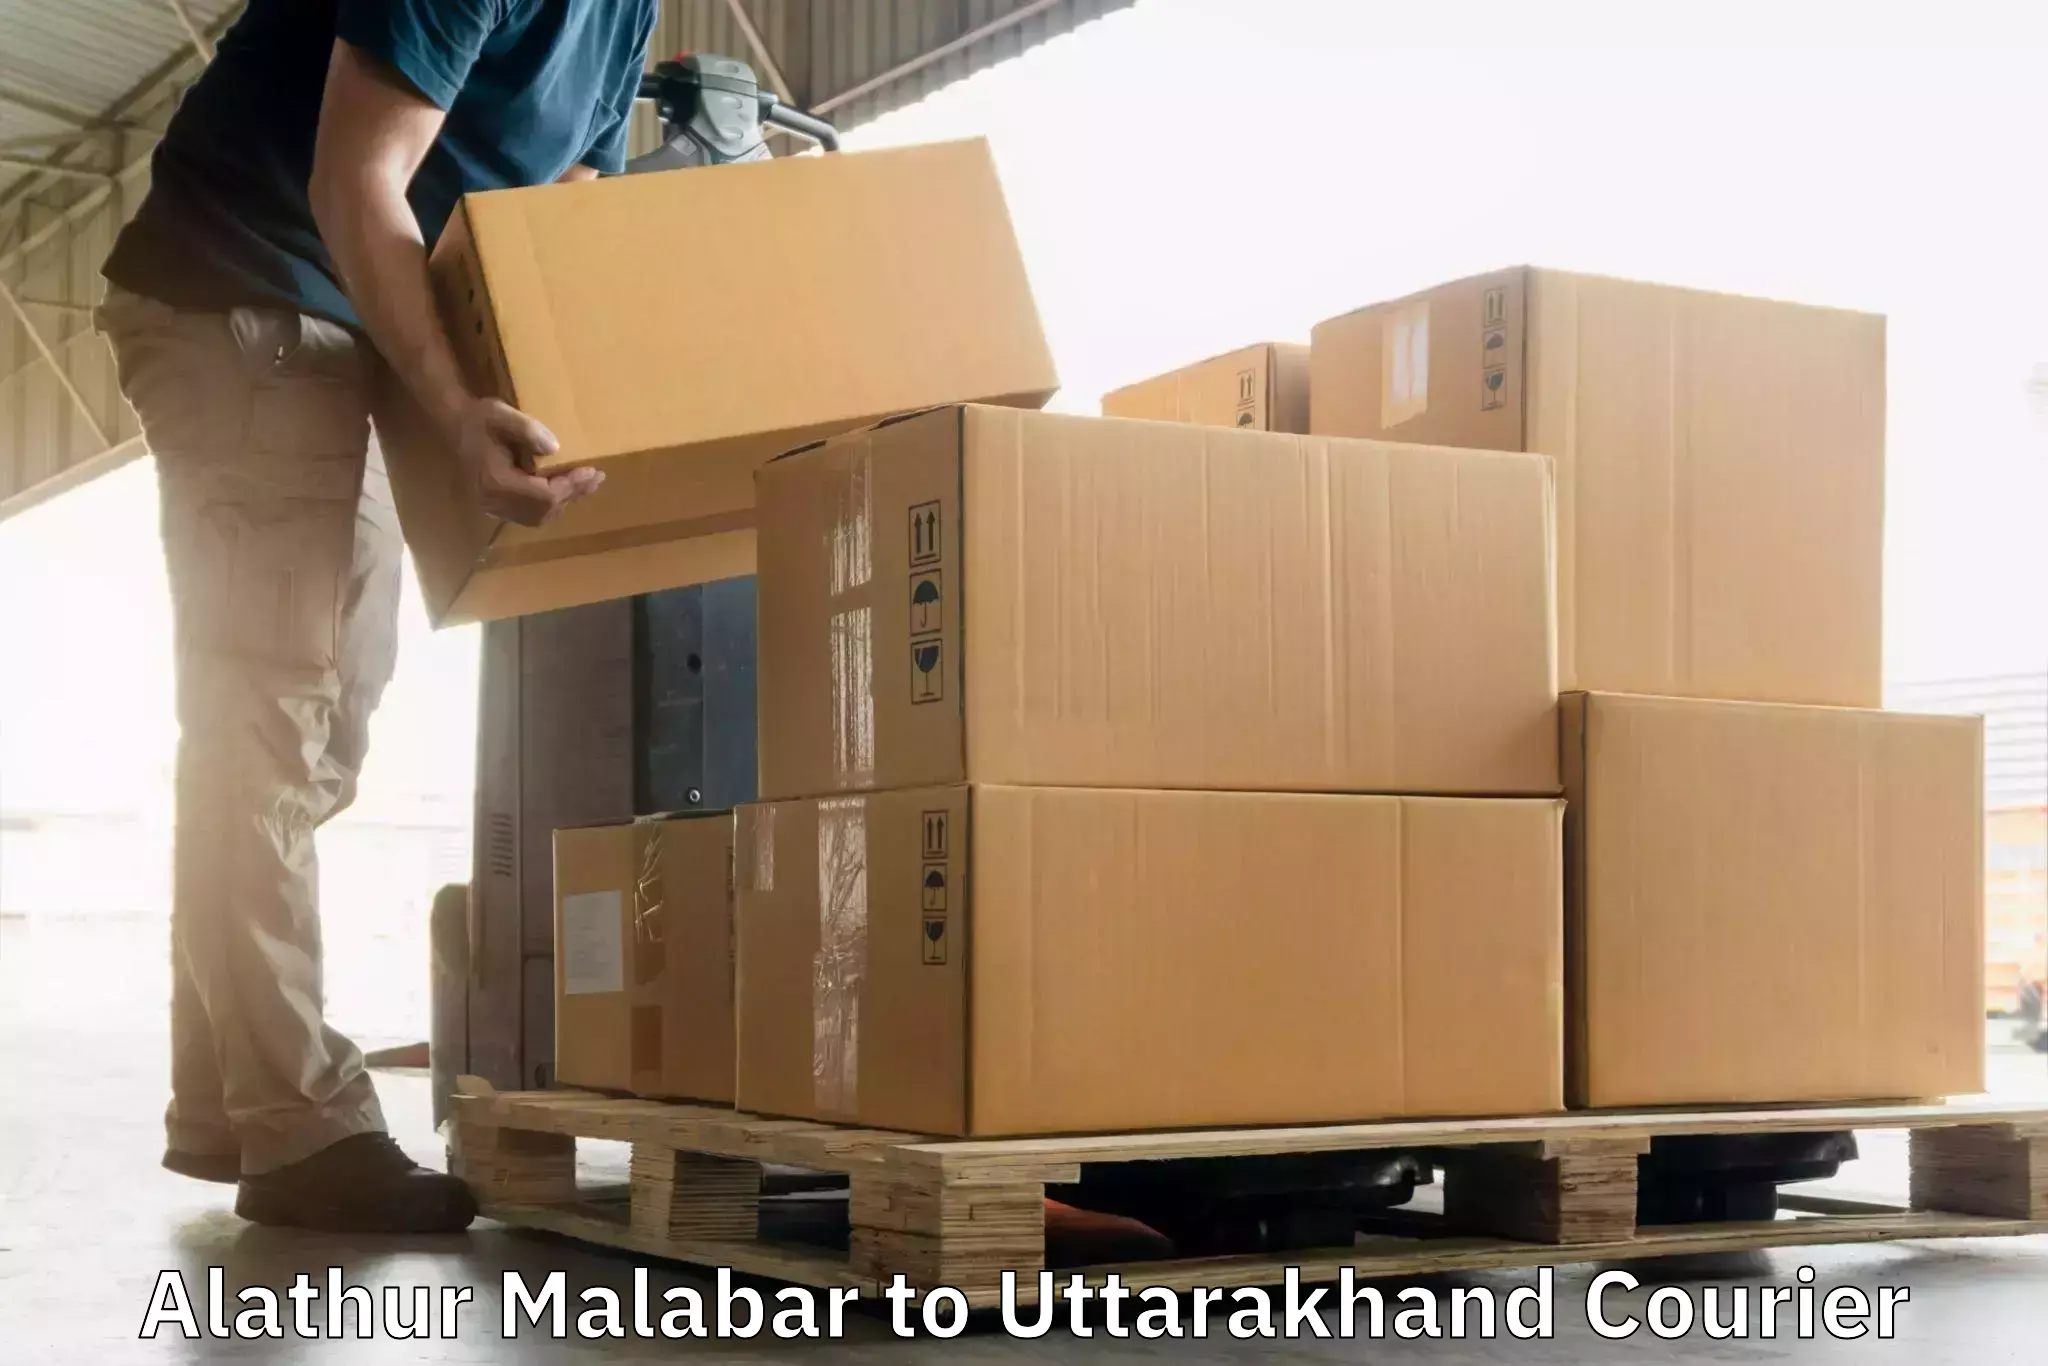 Overnight delivery services Alathur Malabar to Tehri Garhwal